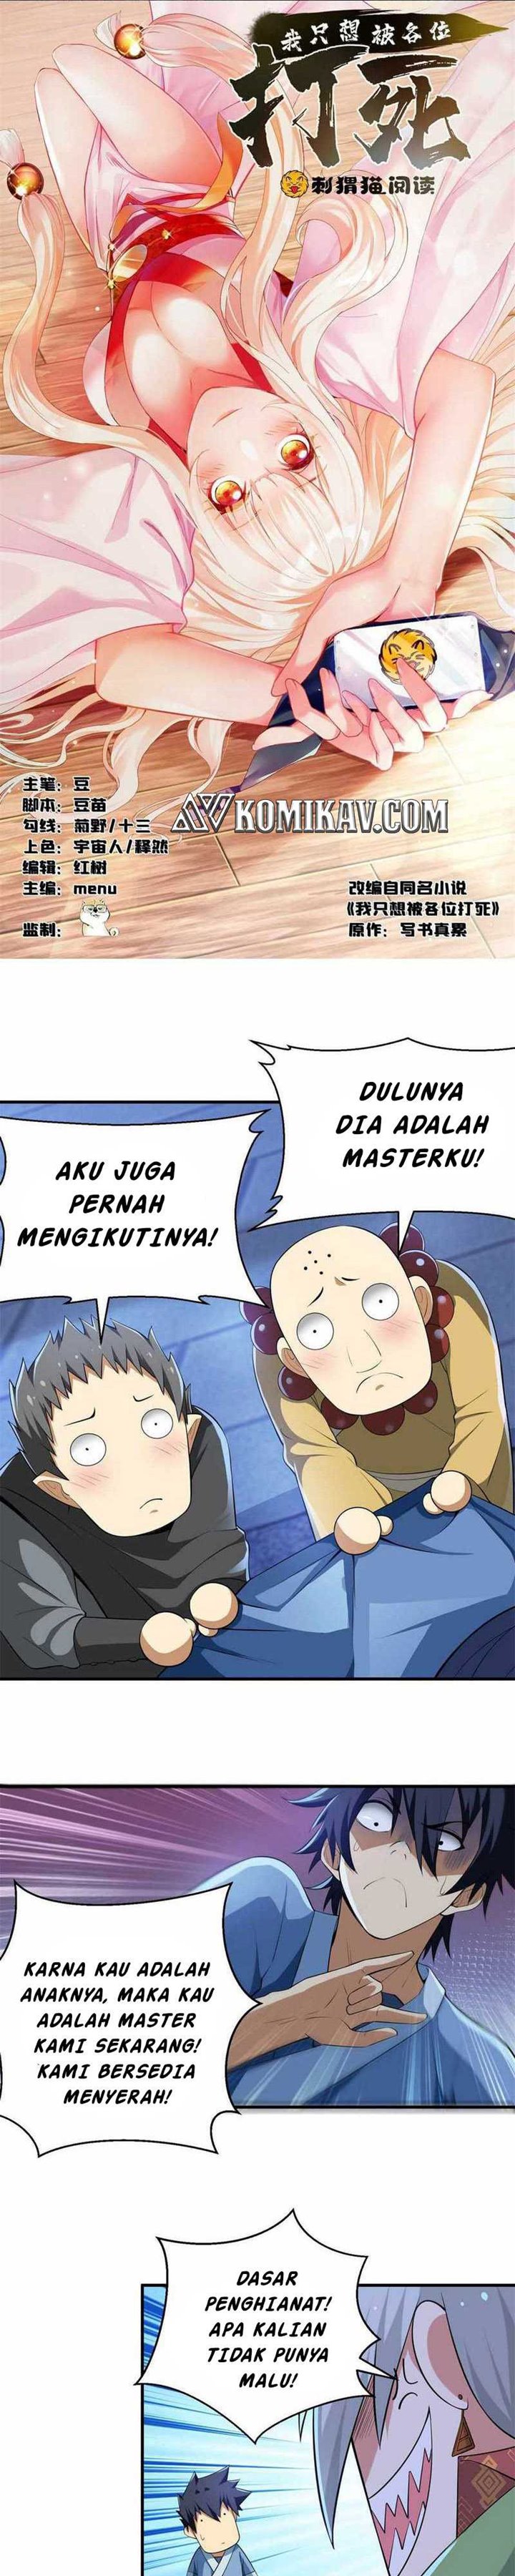 Dilarang COPAS - situs resmi www.mangacanblog.com - Komik i just want to be beaten to death by everyone 015 - chapter 15 16 Indonesia i just want to be beaten to death by everyone 015 - chapter 15 Terbaru 0|Baca Manga Komik Indonesia|Mangacan